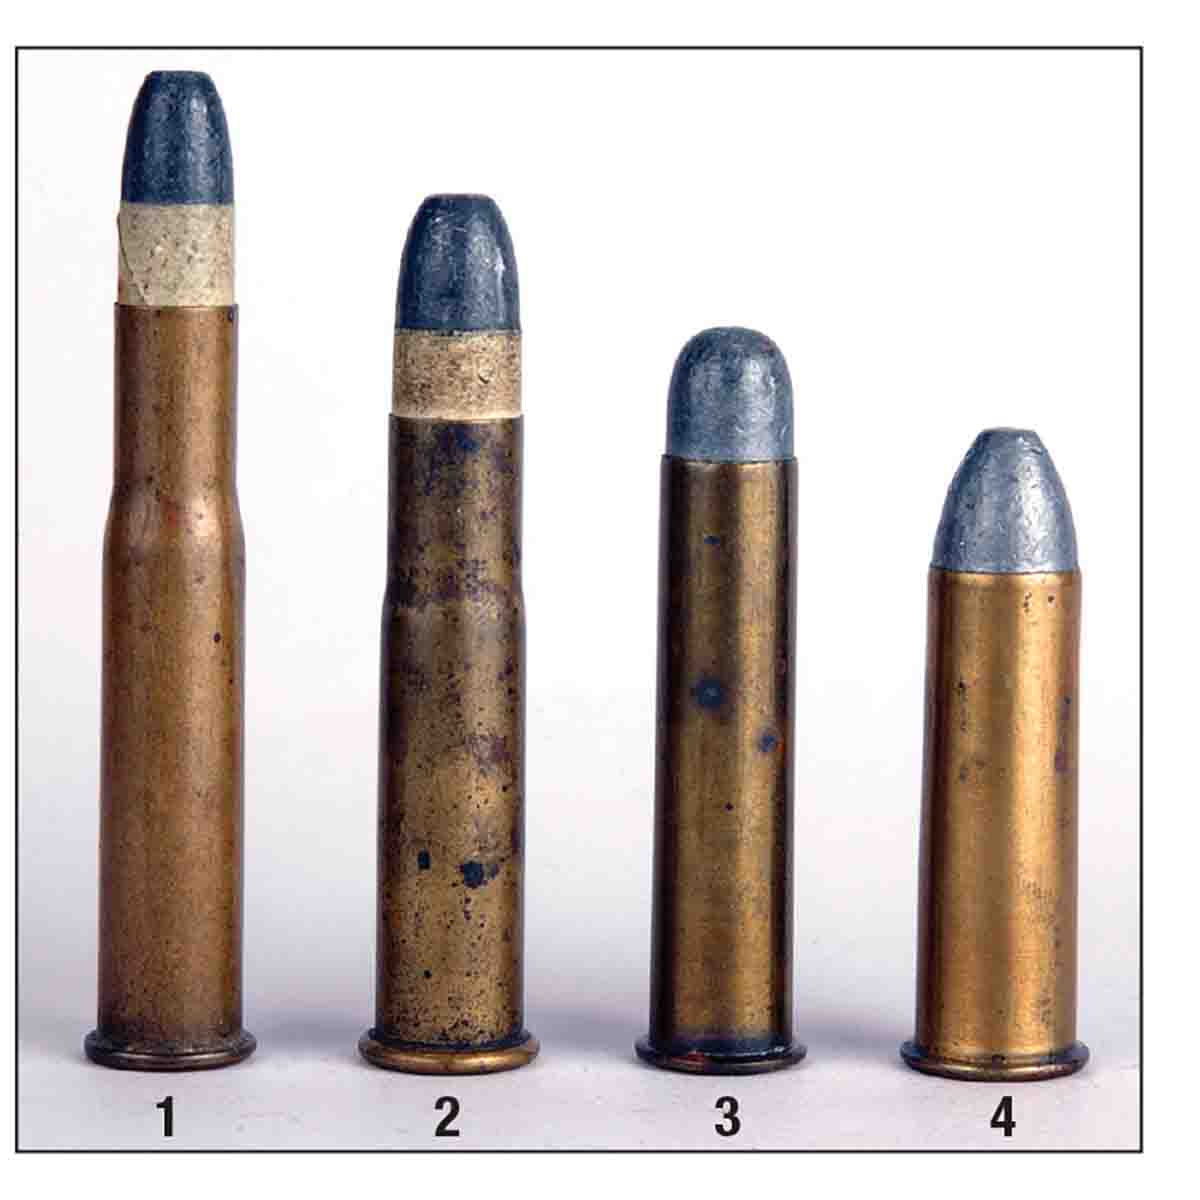 Shown here is a (1) .40-90 Sharps Bottleneck and a (2) .44-77 with some of its contemporary cartridges; a (3) .45 Government and a (4) .50 Government. All these cartridges are originals from the late 1800s.